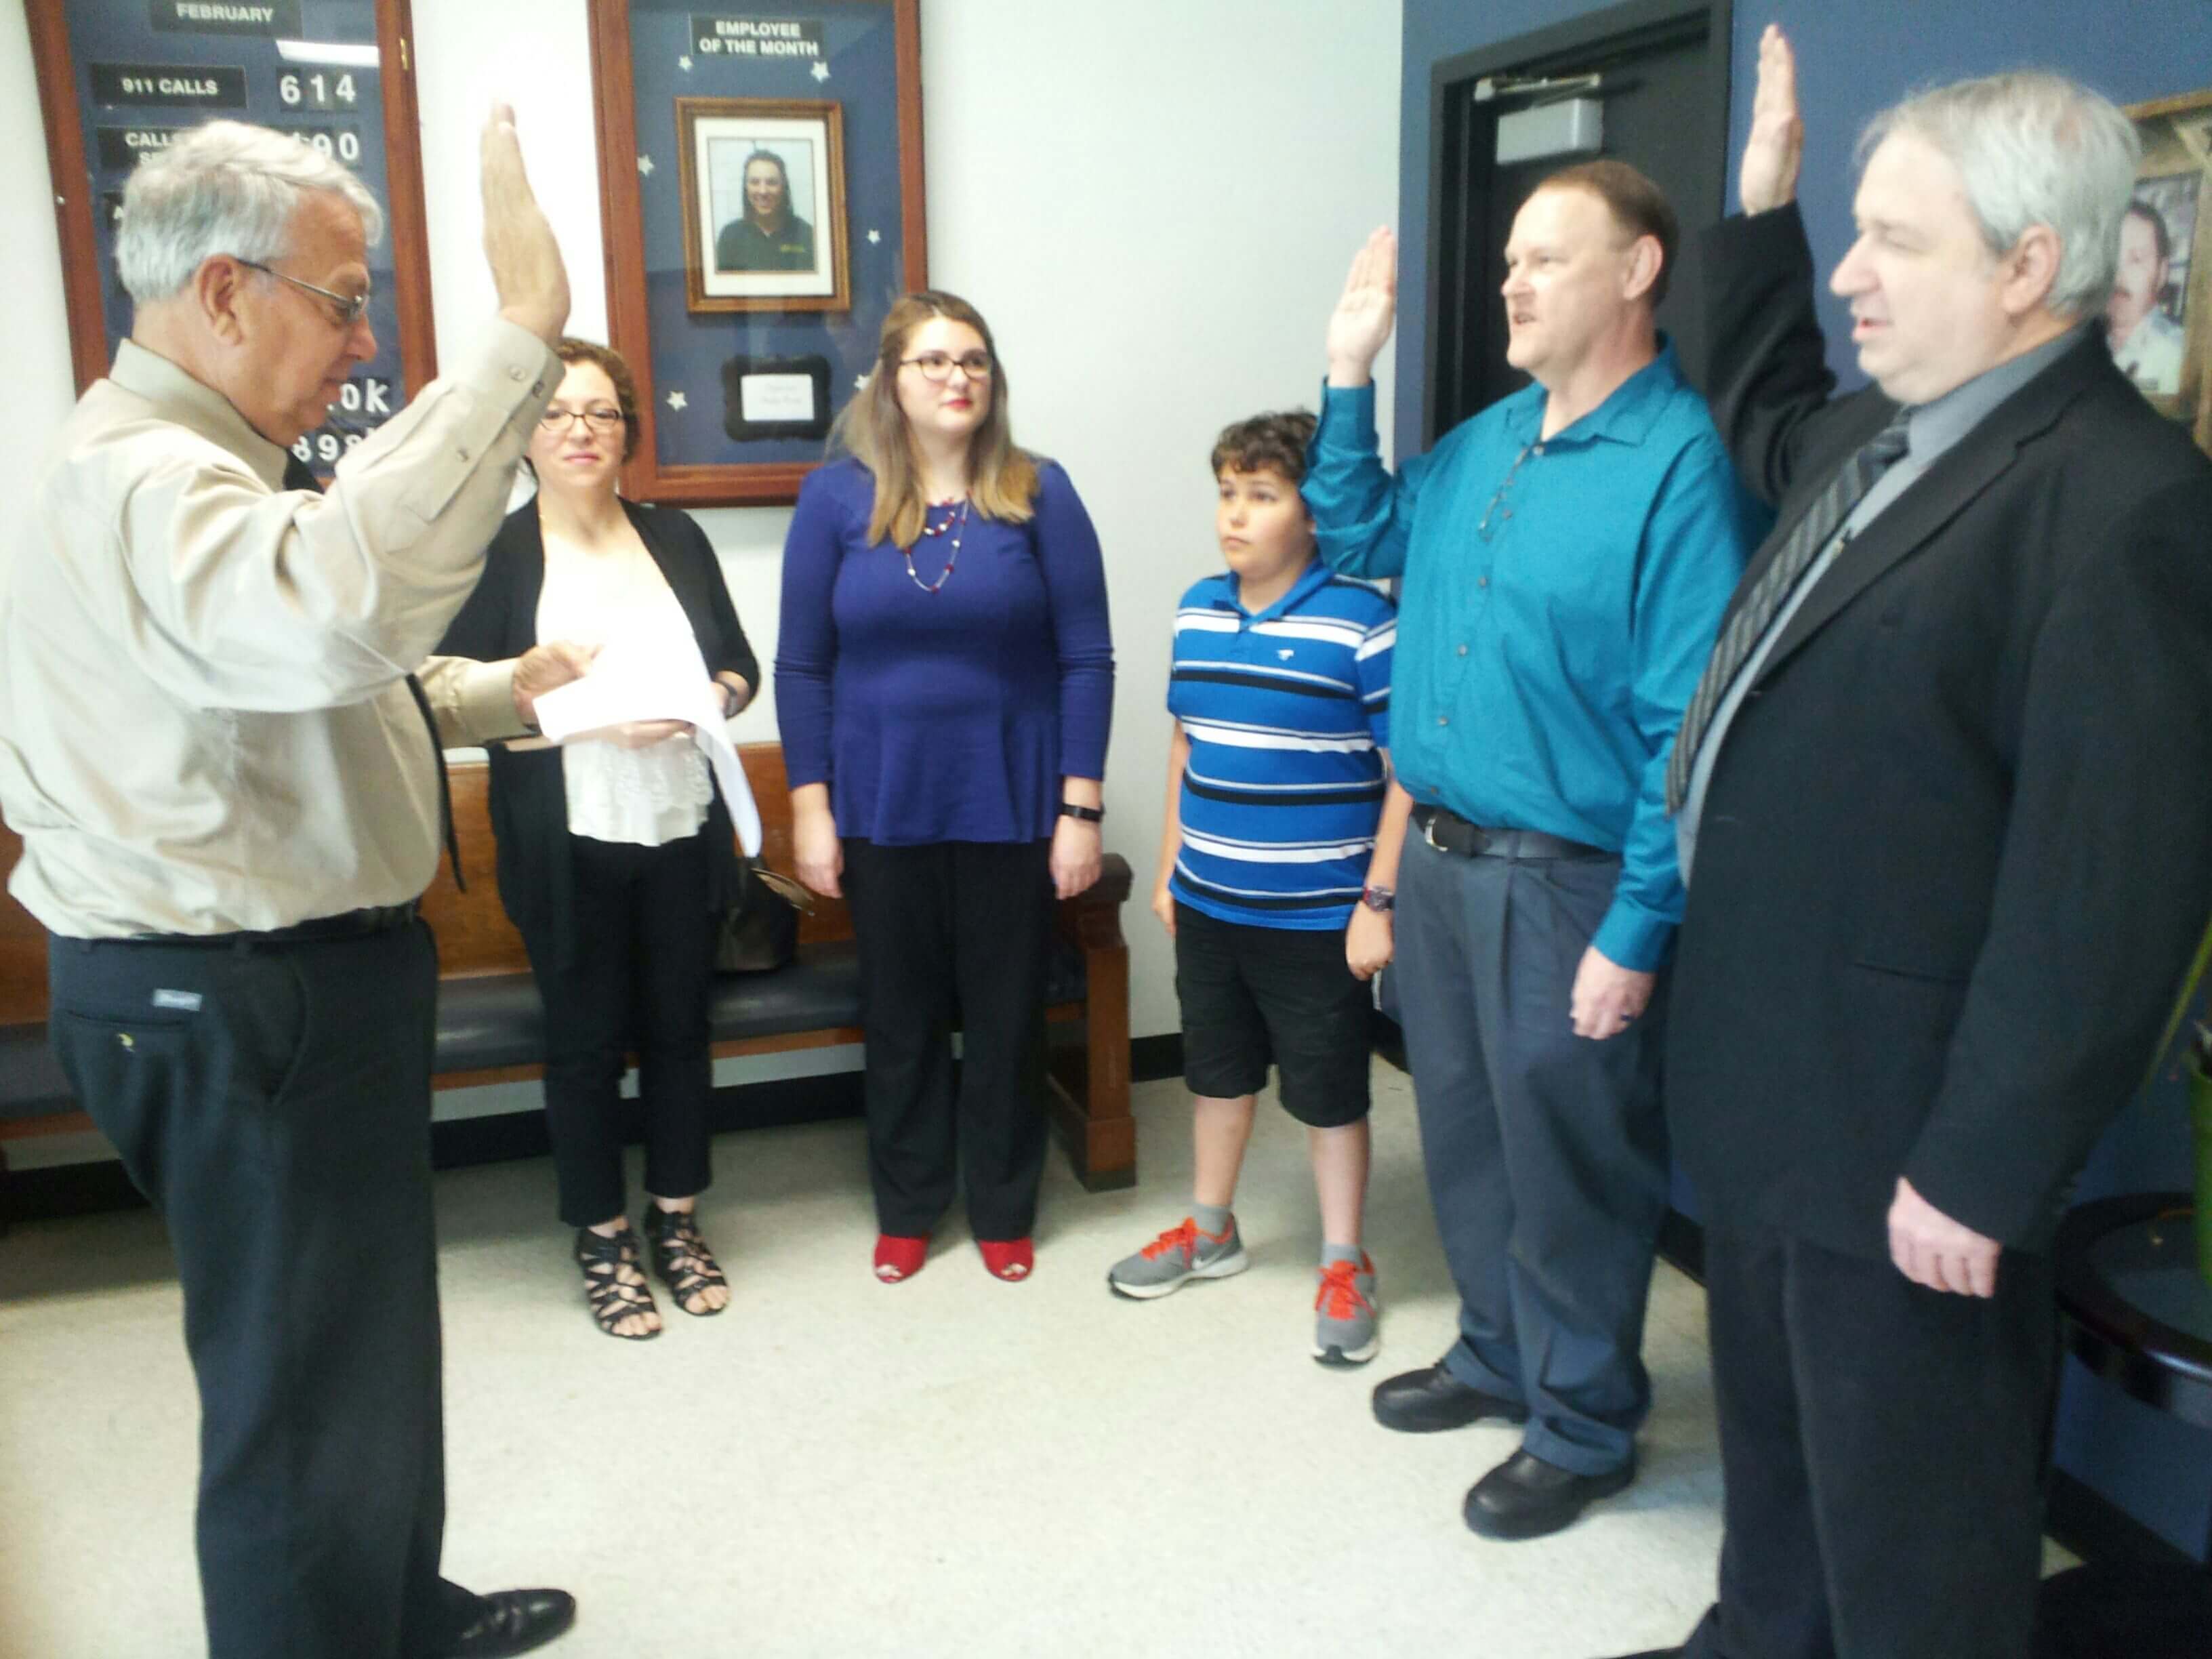 LIBERTY COUNTY SHERIFF RADER SWEARS IN TWO NEW RESERVE DEPUTIES